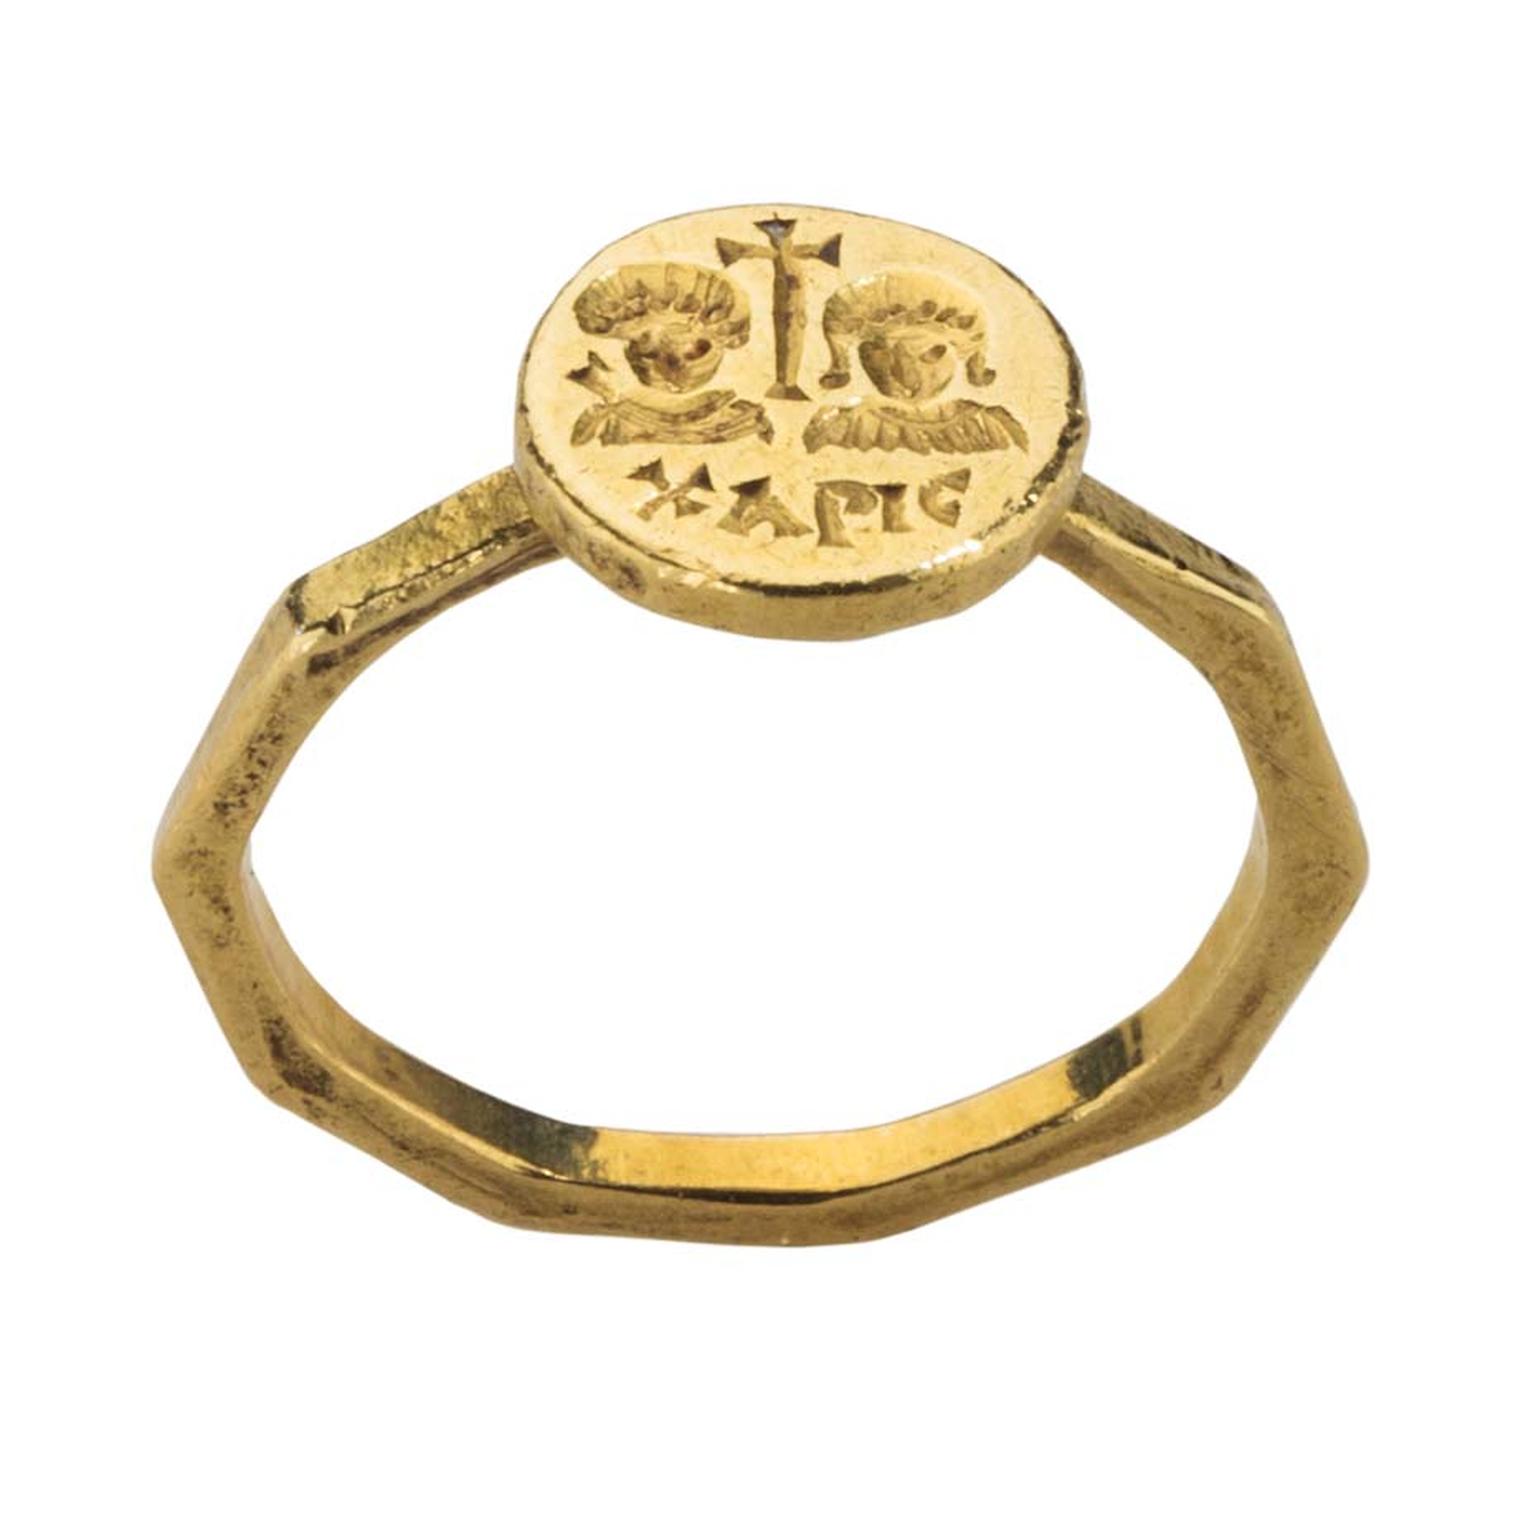 Treasures and Talismans Exhibition_Byzantine gold marriage ring.jpg